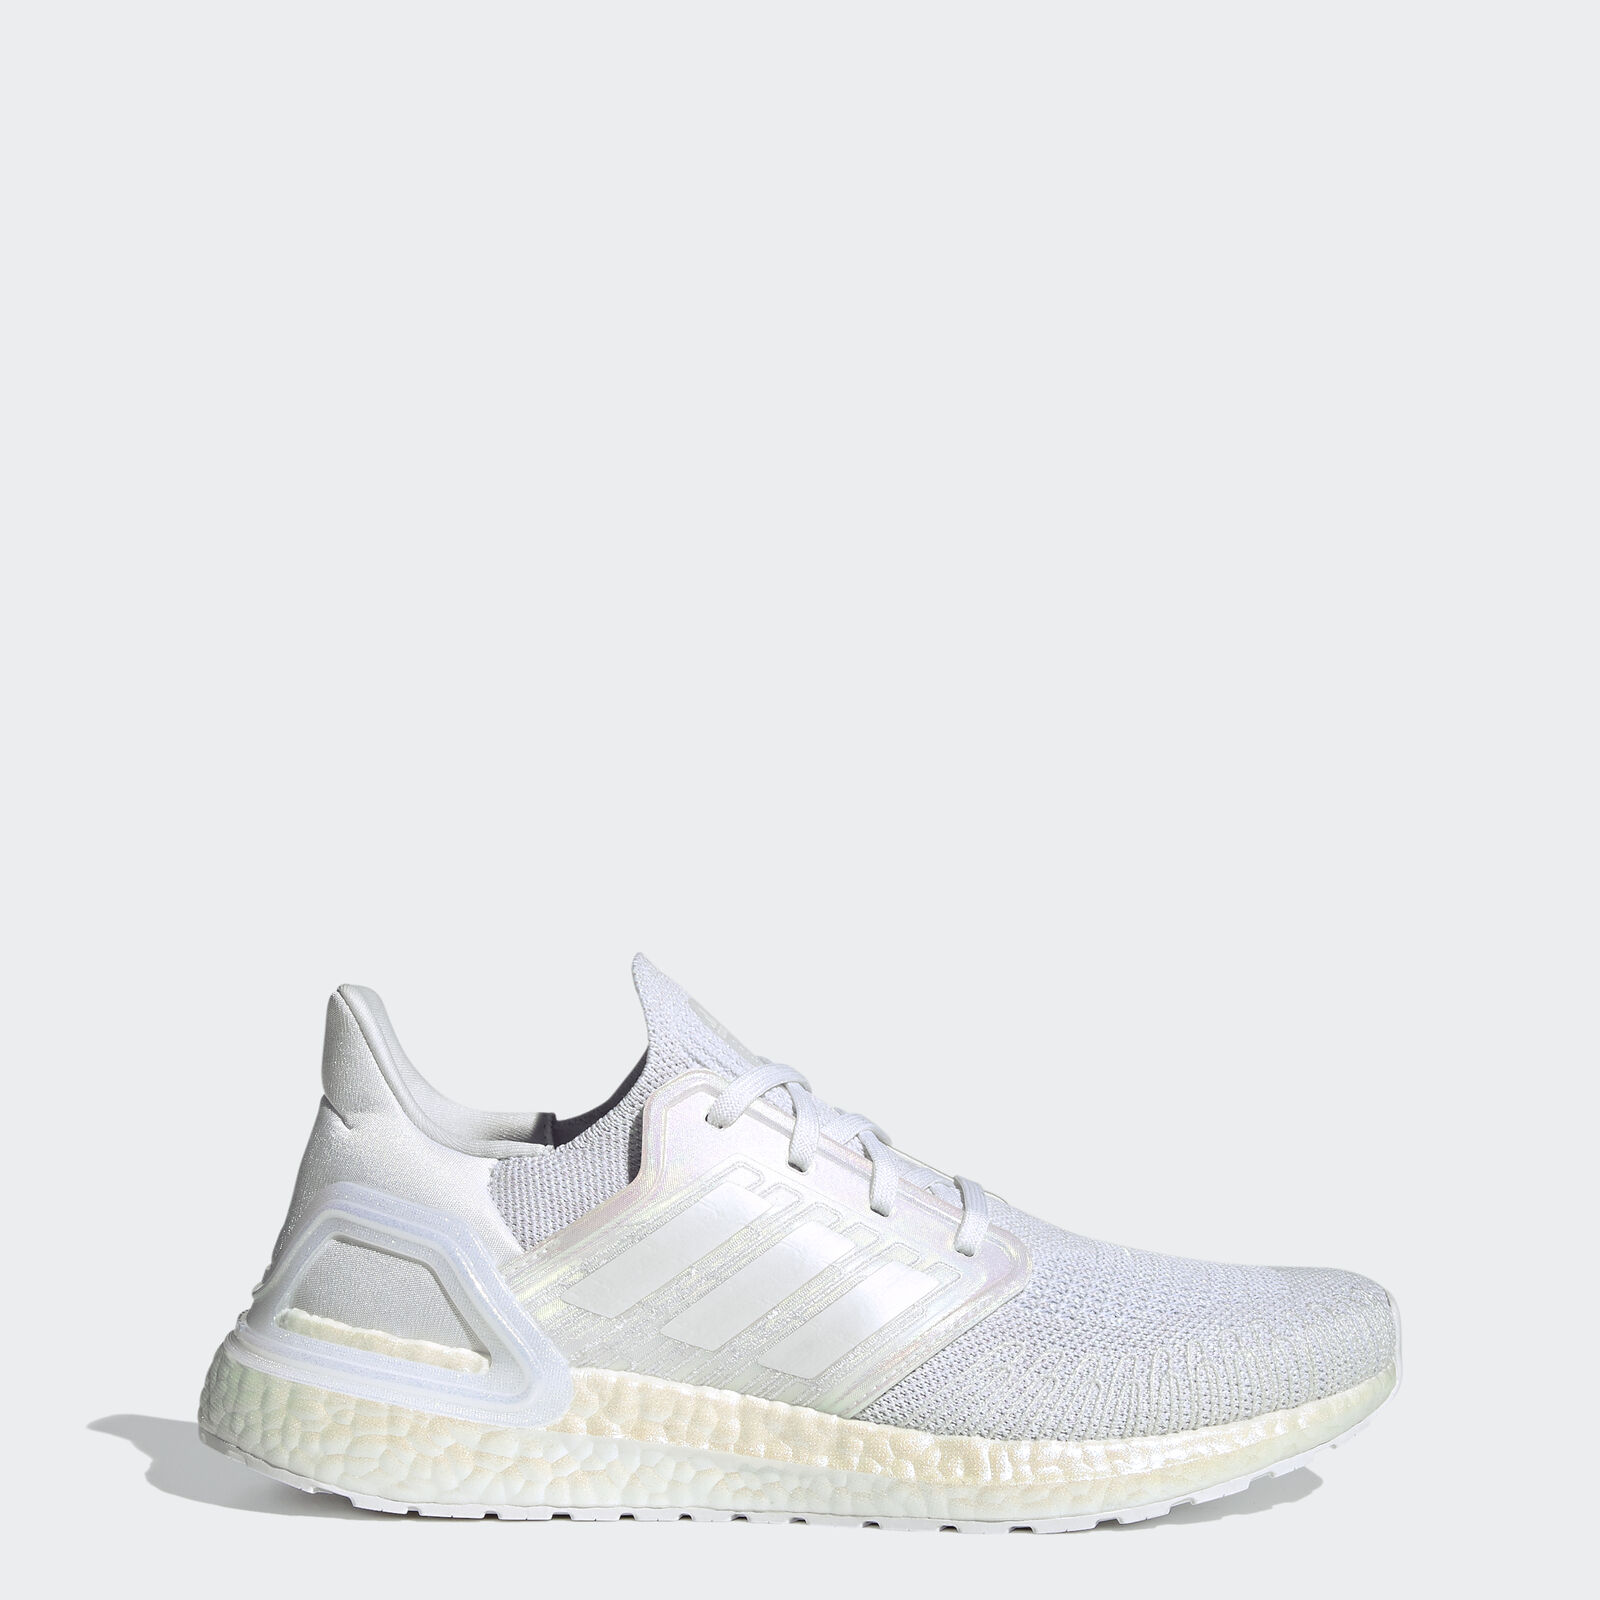 sexual Hen Tiny adidas ebay 30% Off $40+: adidas Men's Ultraboost 20 Shoes (white)